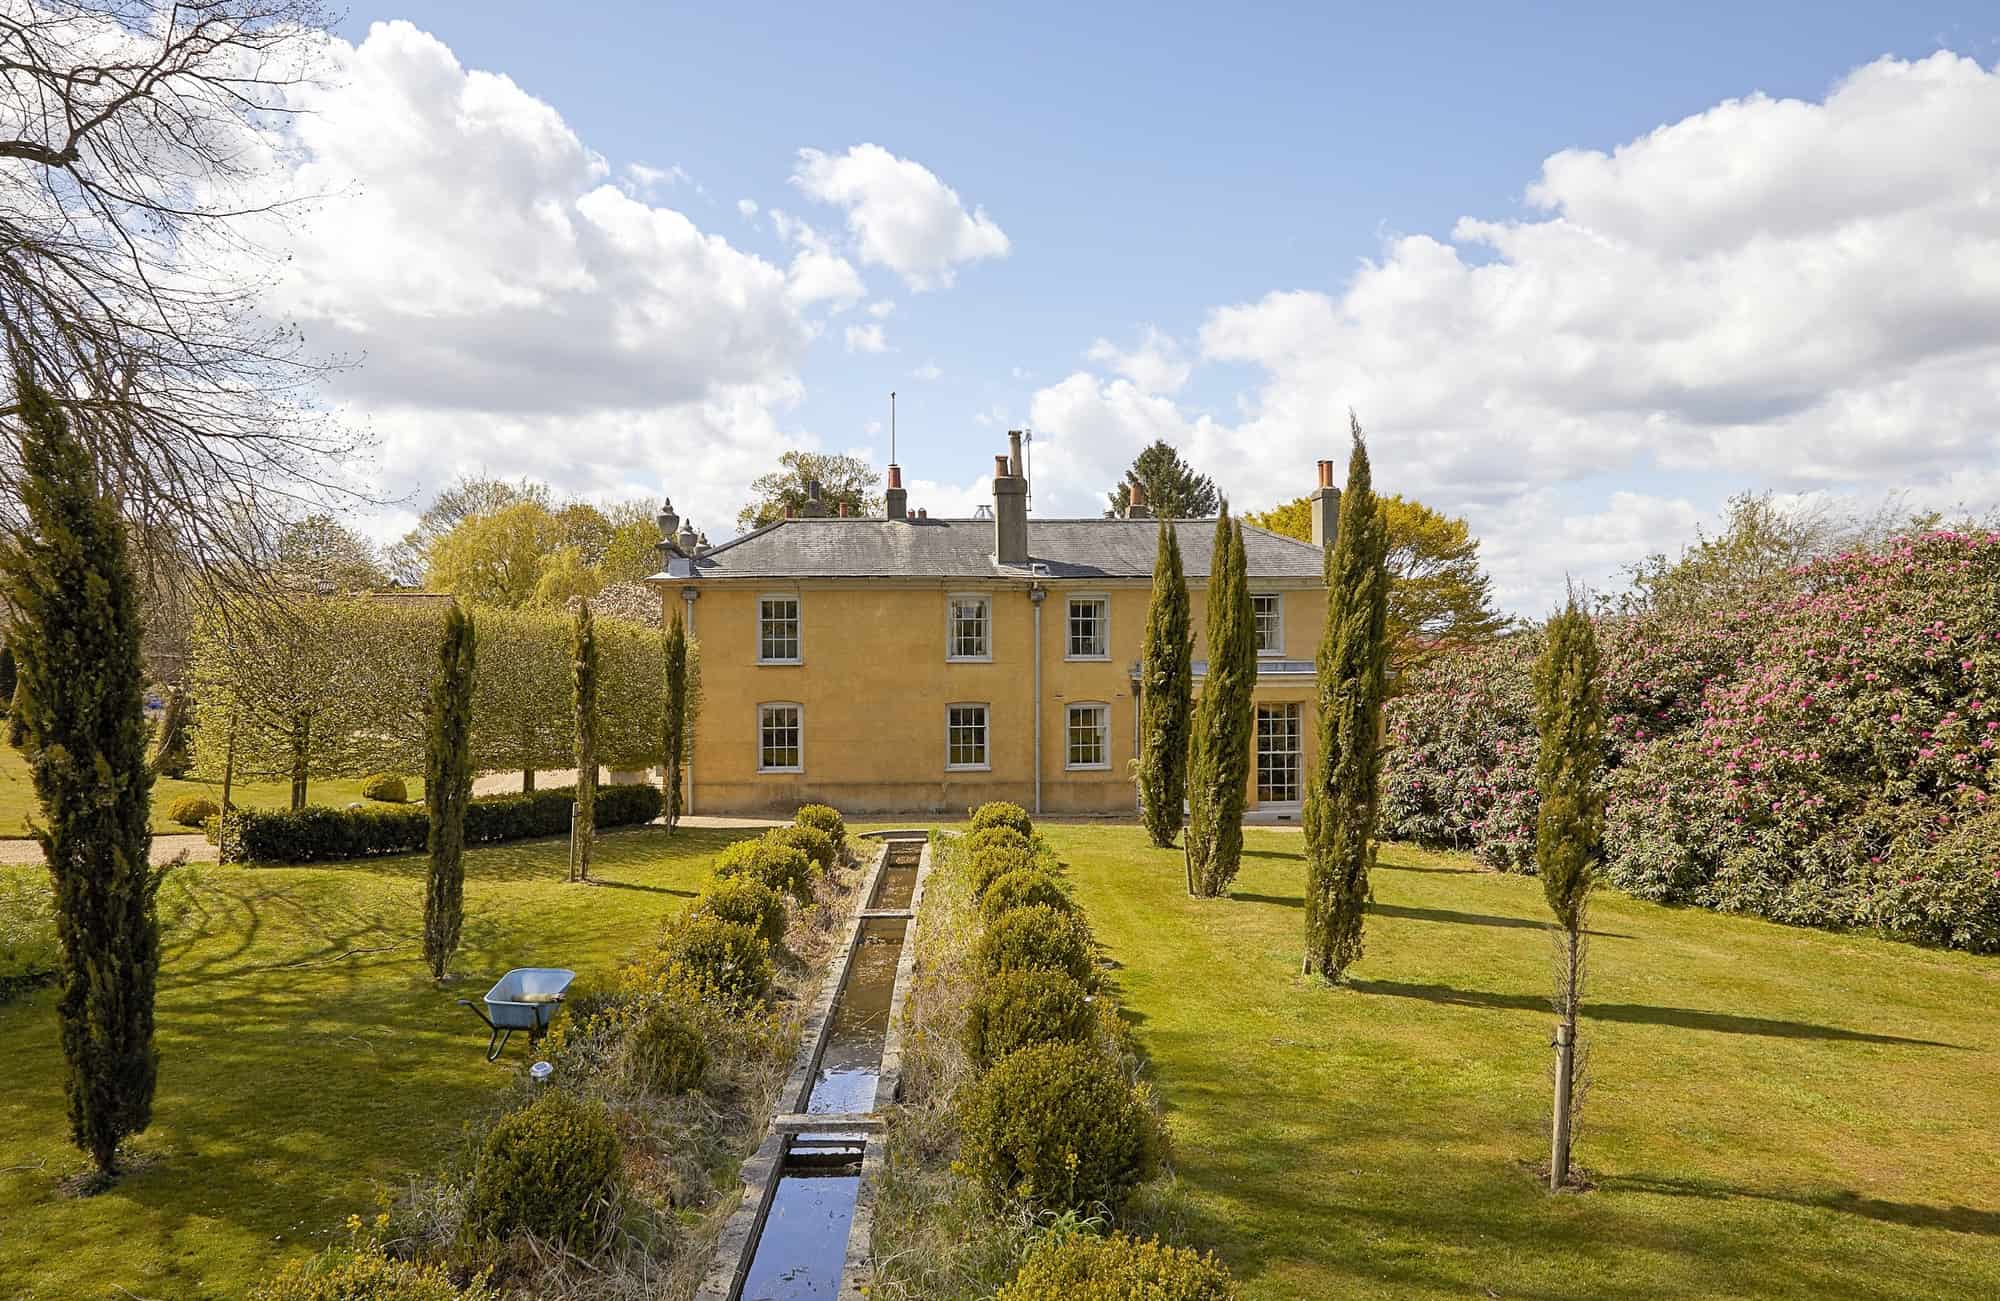 The Old Rectory RH1 - An elegant Georgian Manor House surrounded by 5 acres of Italianate style gardens and with characterful interiors - The Location Guys